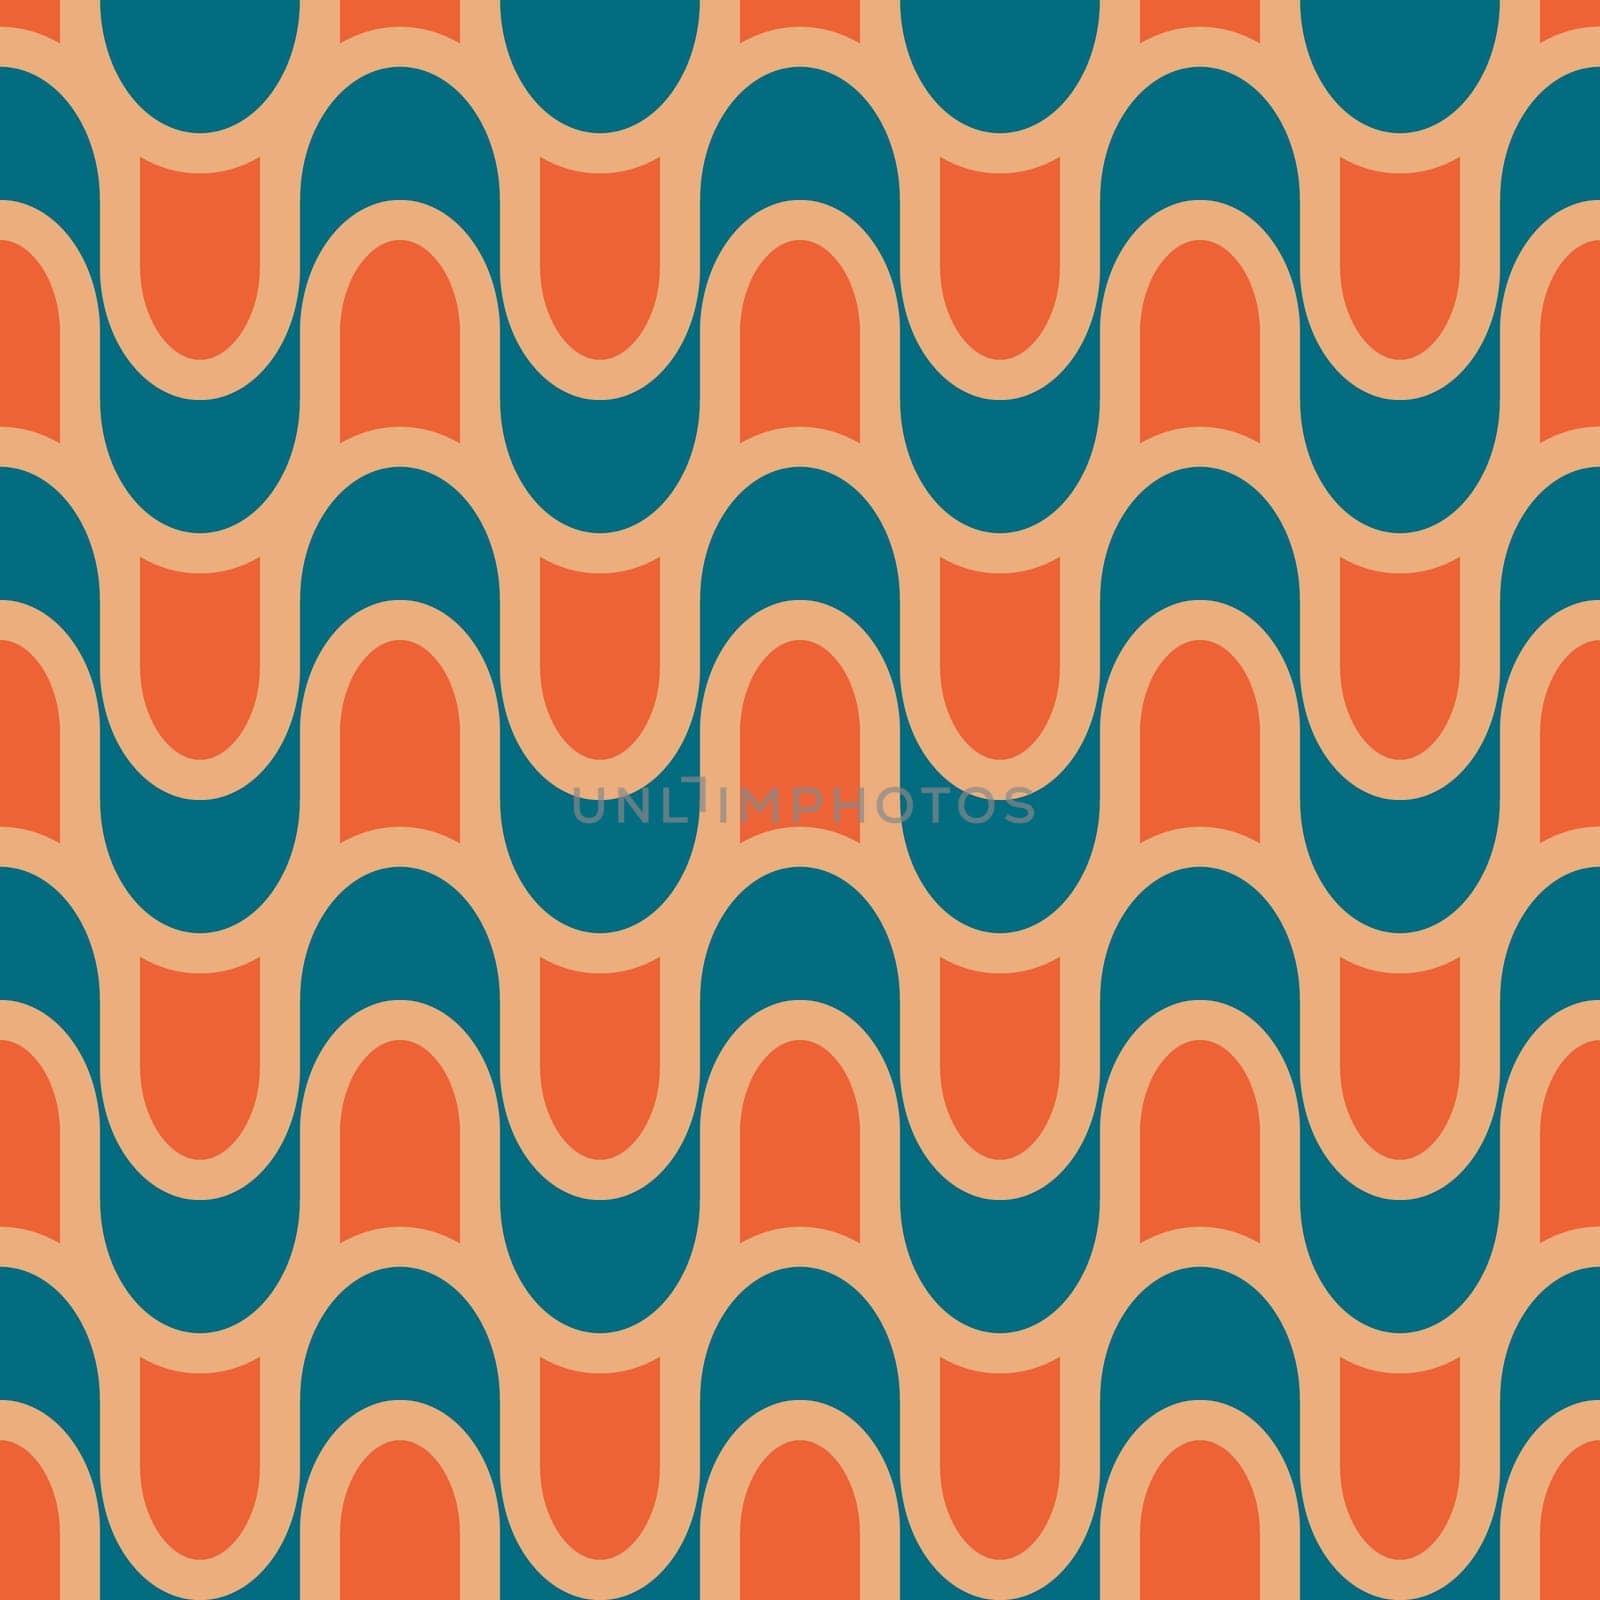 Retro seamless pattern in the style of the 70s and 60s by Dustick